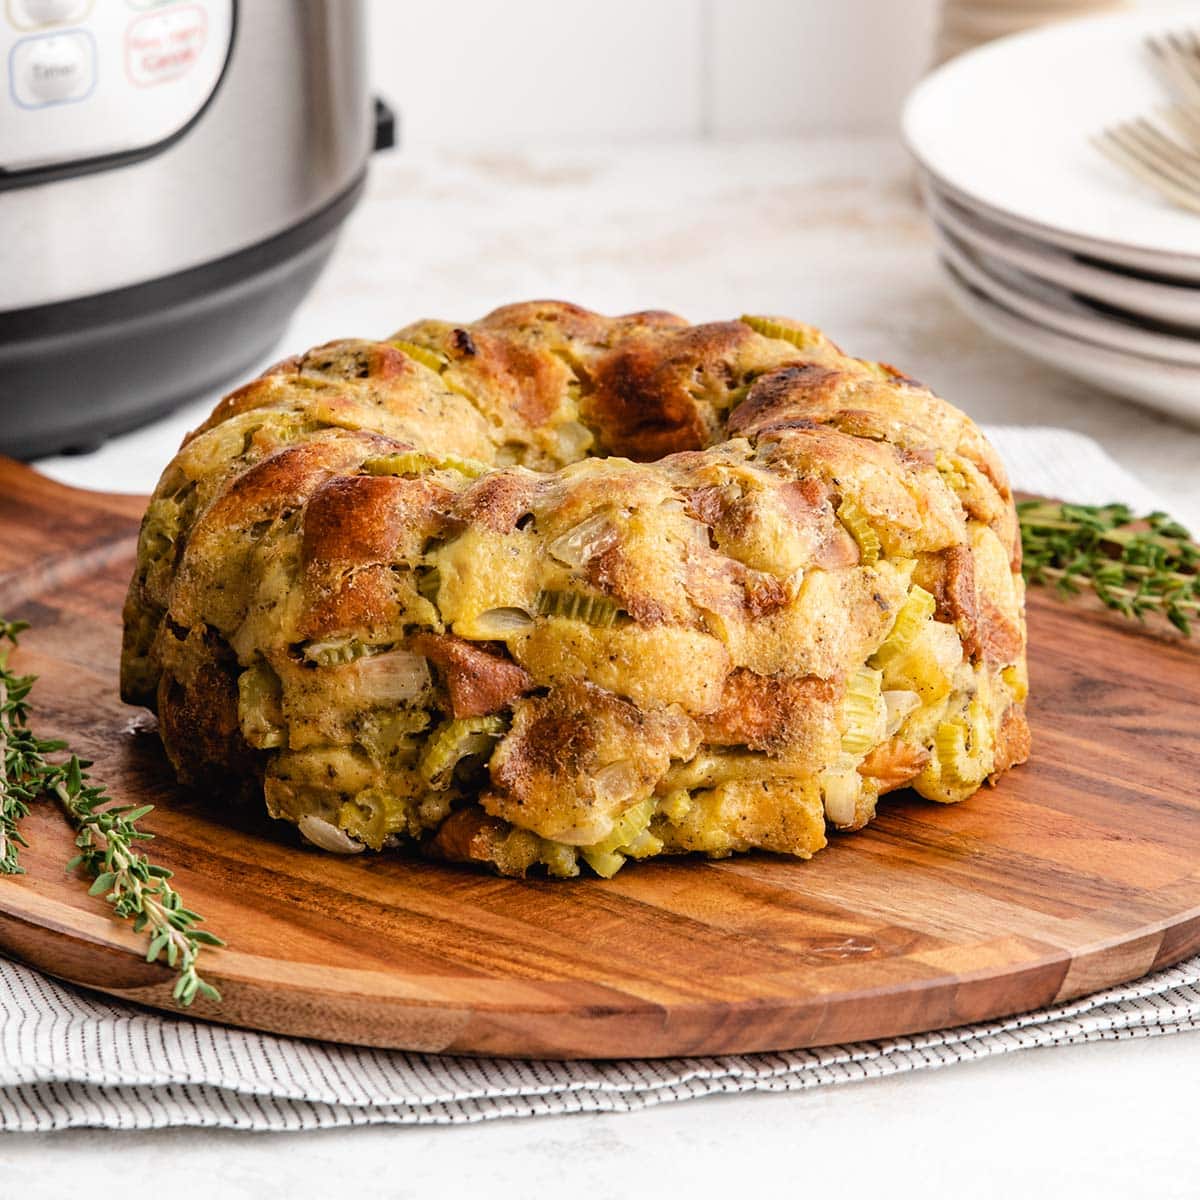 Instant Pot Stuffing - The Recipe Well